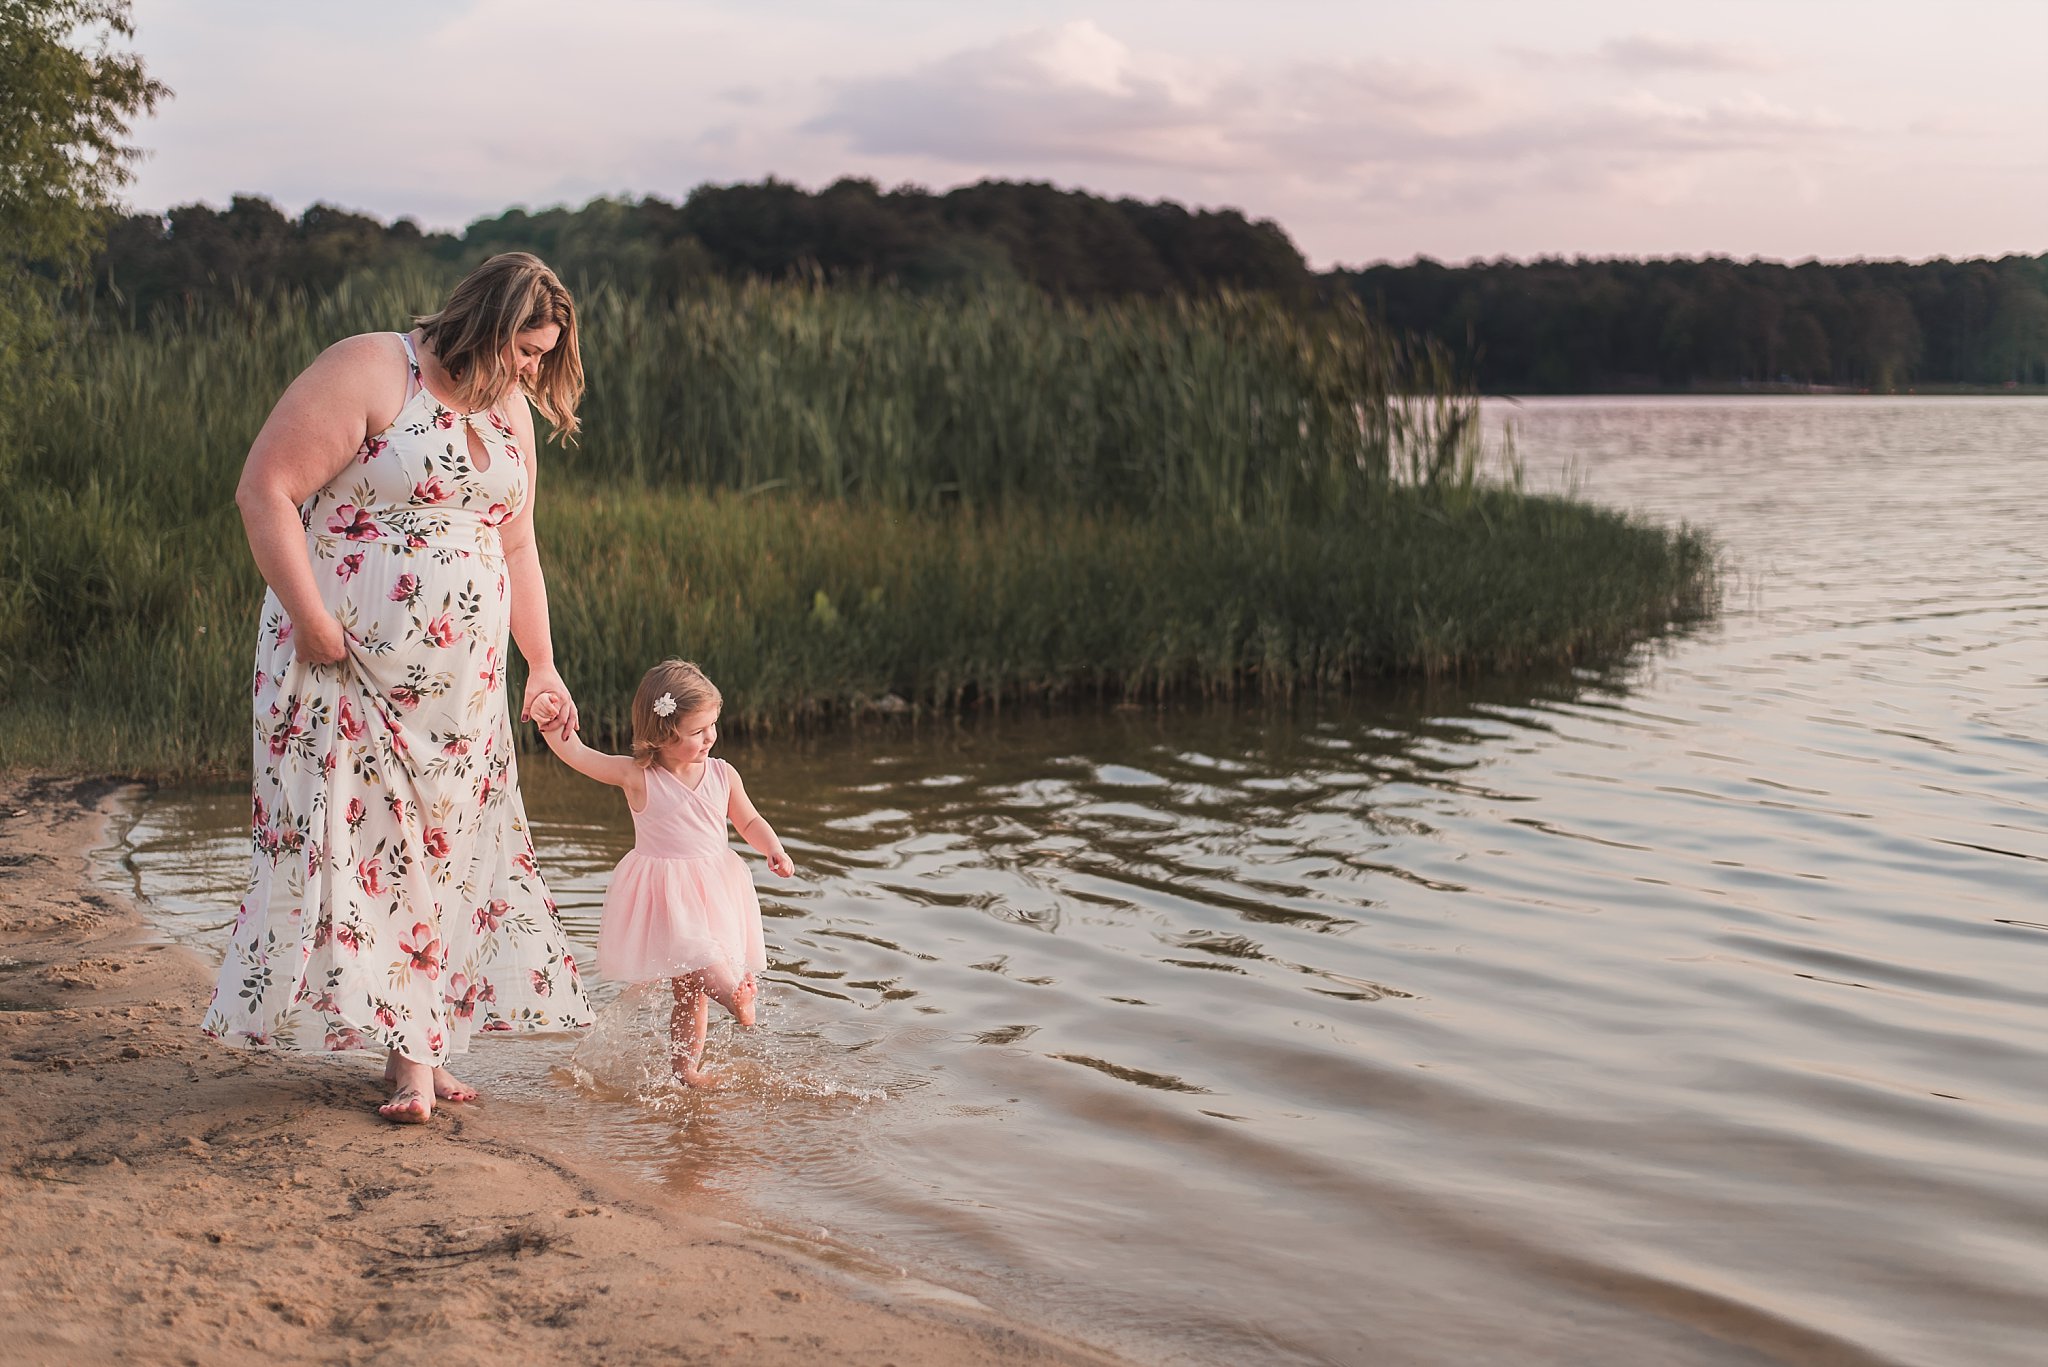 mother and daughter walking on beach Cauble Park Lake Acworth